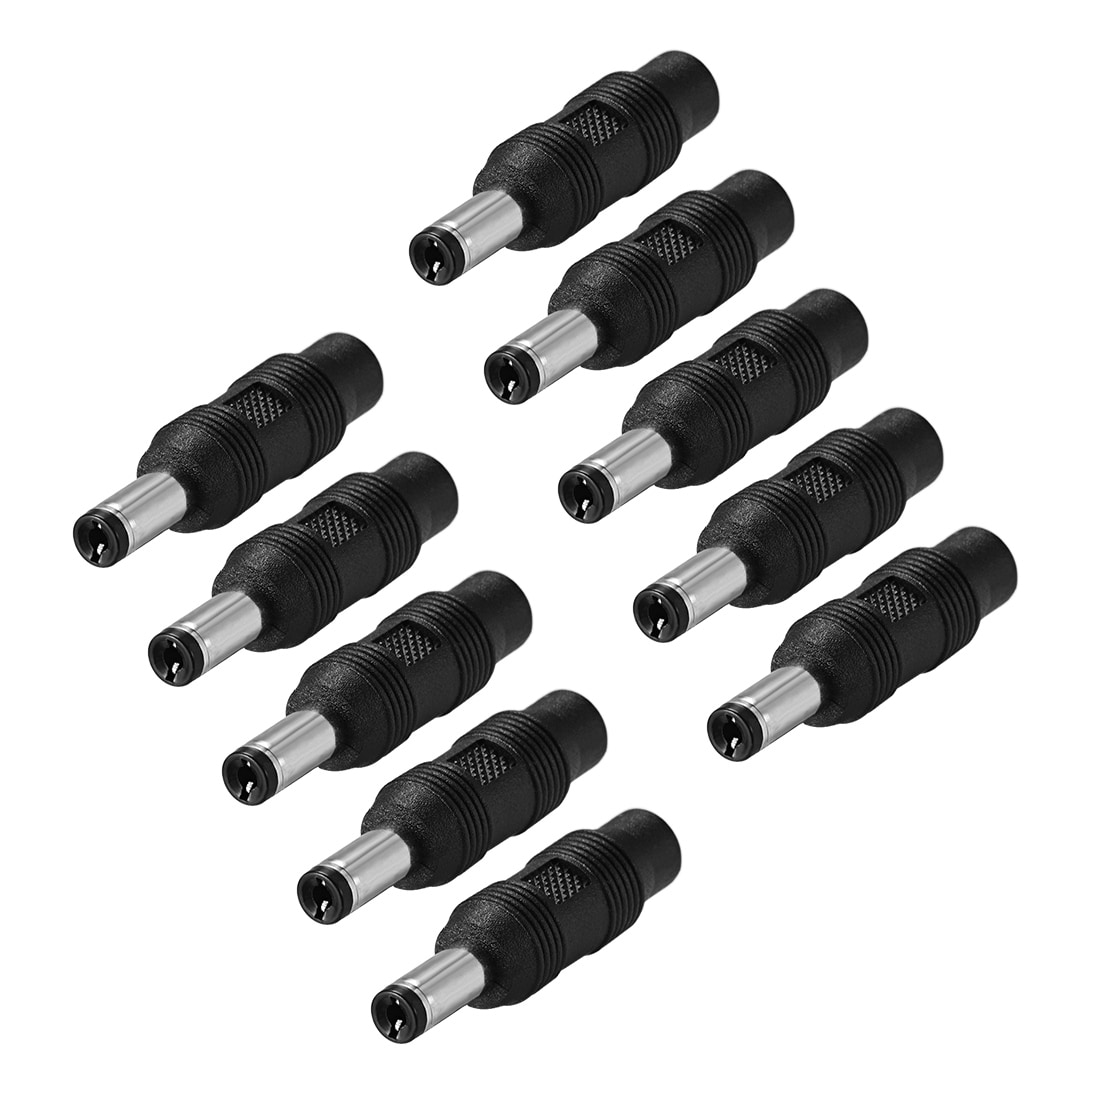 5.5*2.1mm Male To 5.5x2.1mm Male DC Power Plug CCTV Adapter Connector Cable ZJP 